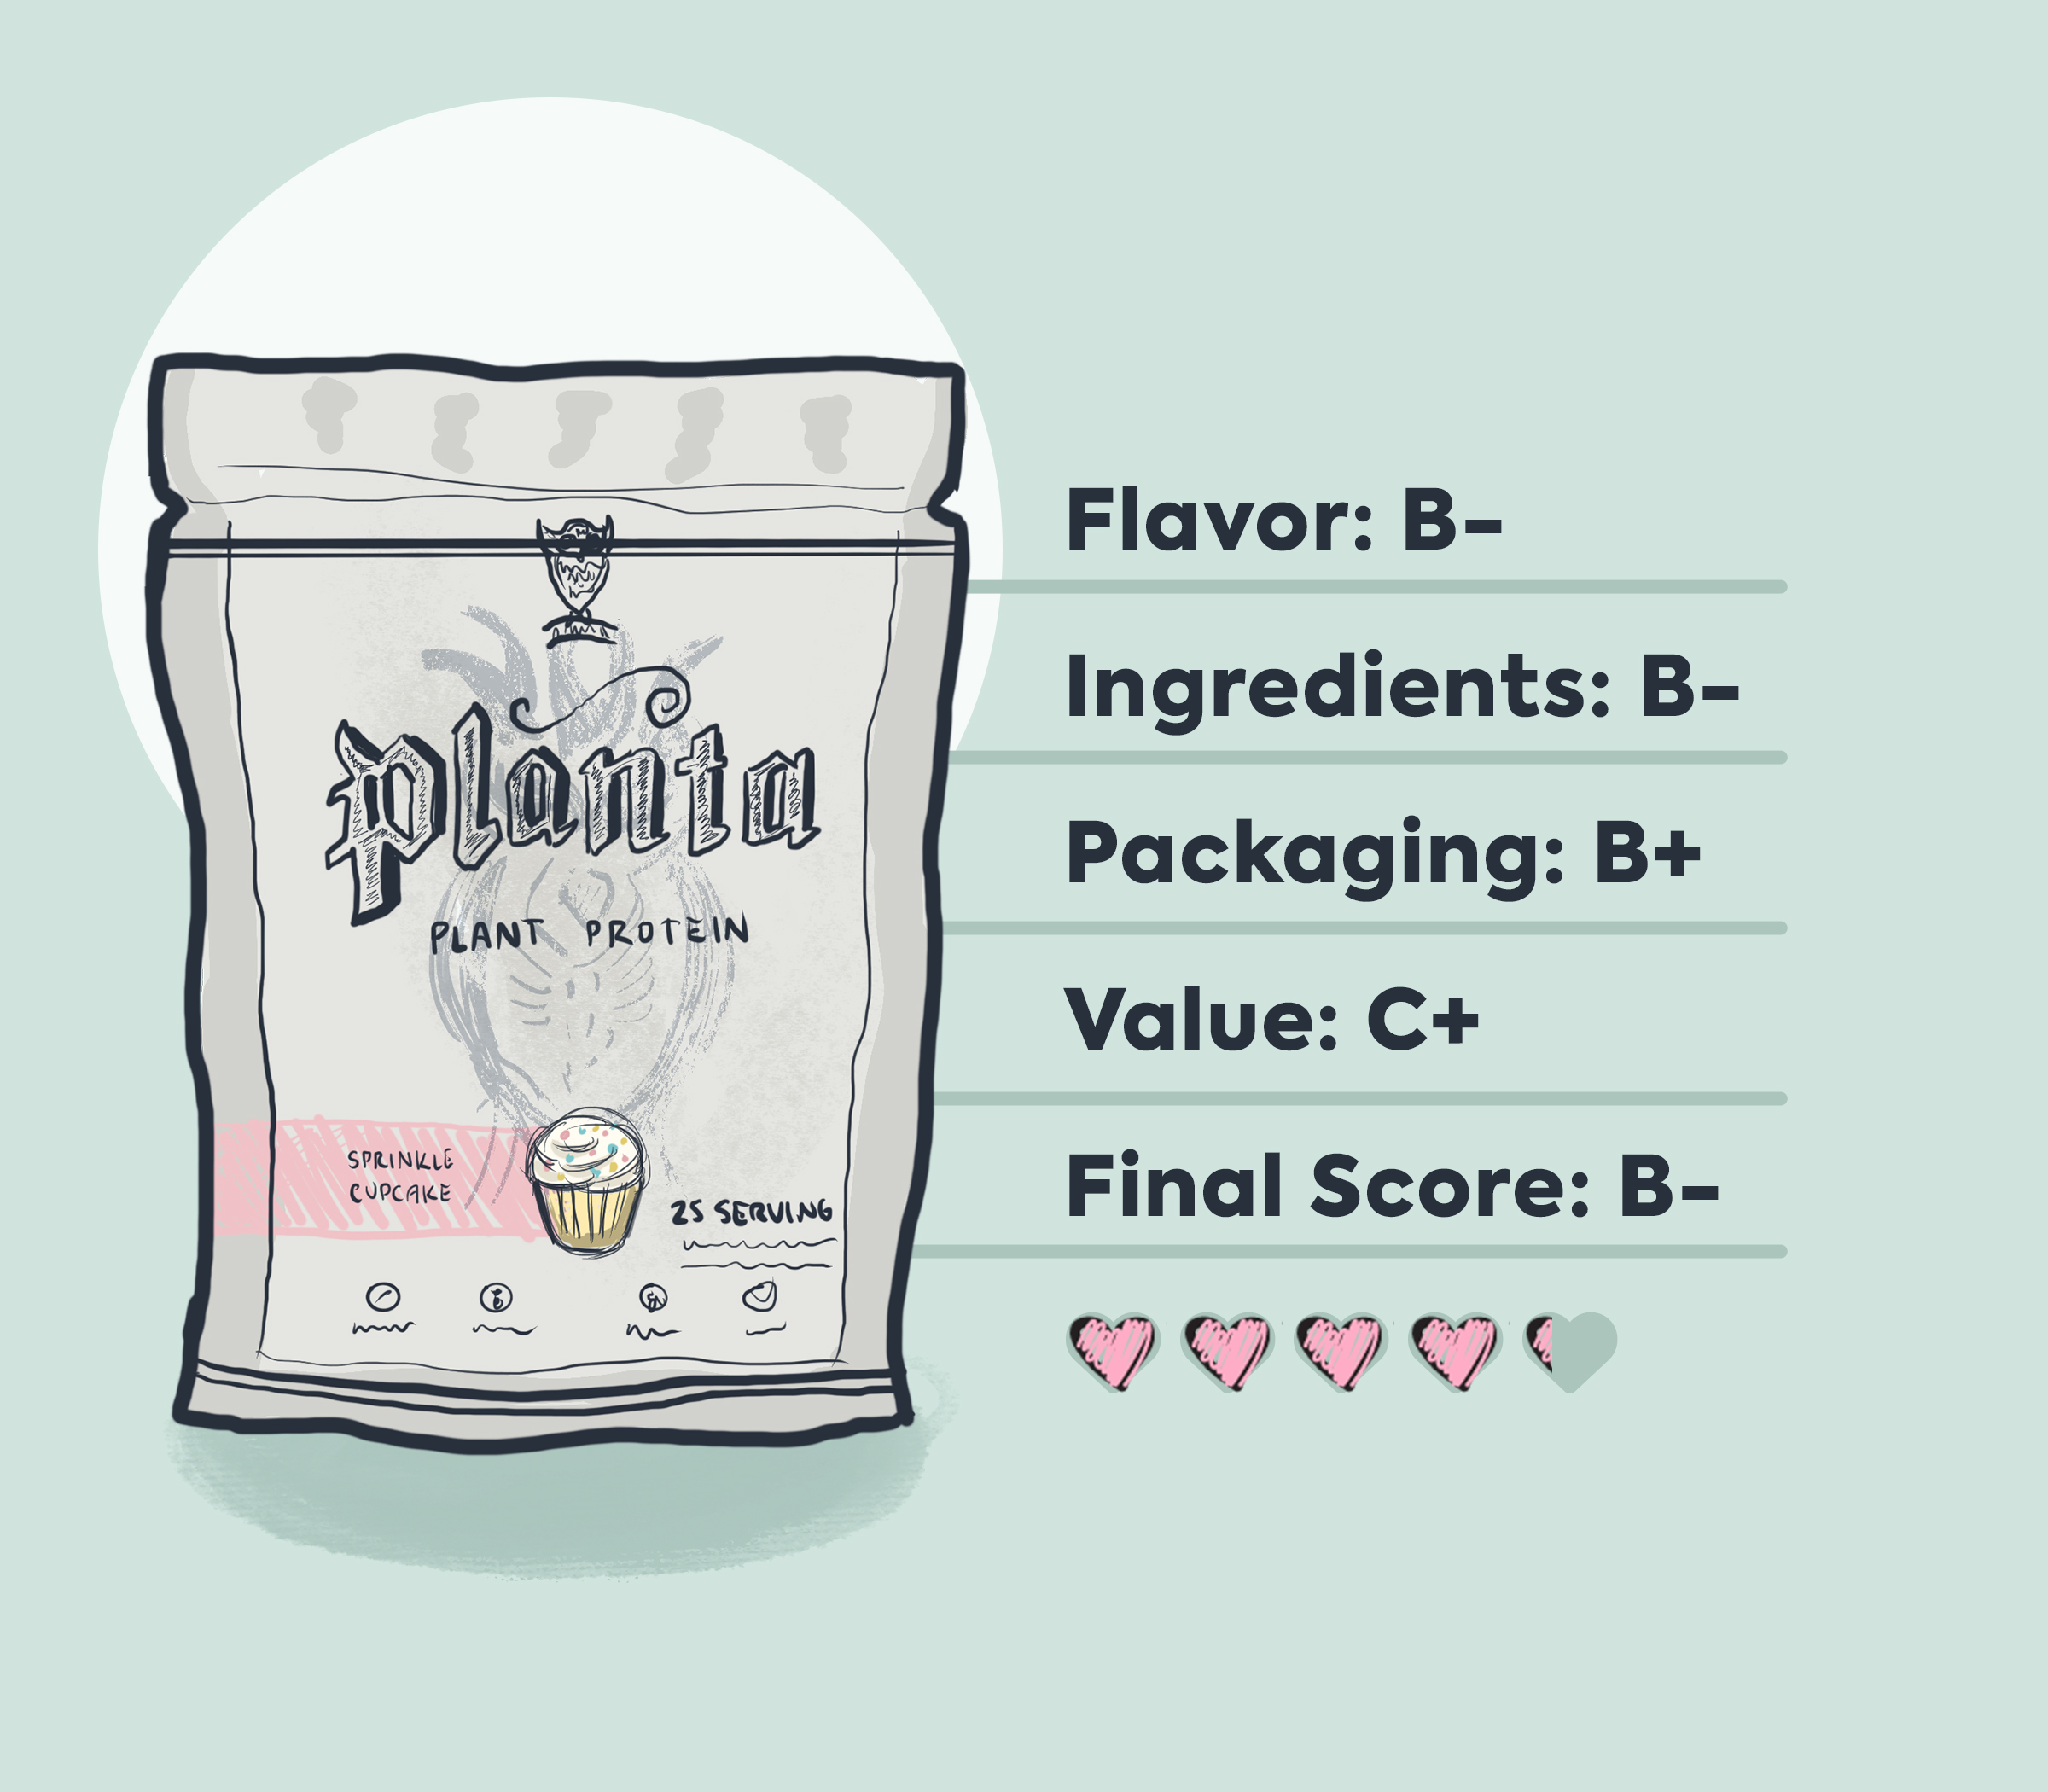 stylized cartoon packaging of ambrosia planta protein powder, with overall review information over light green background